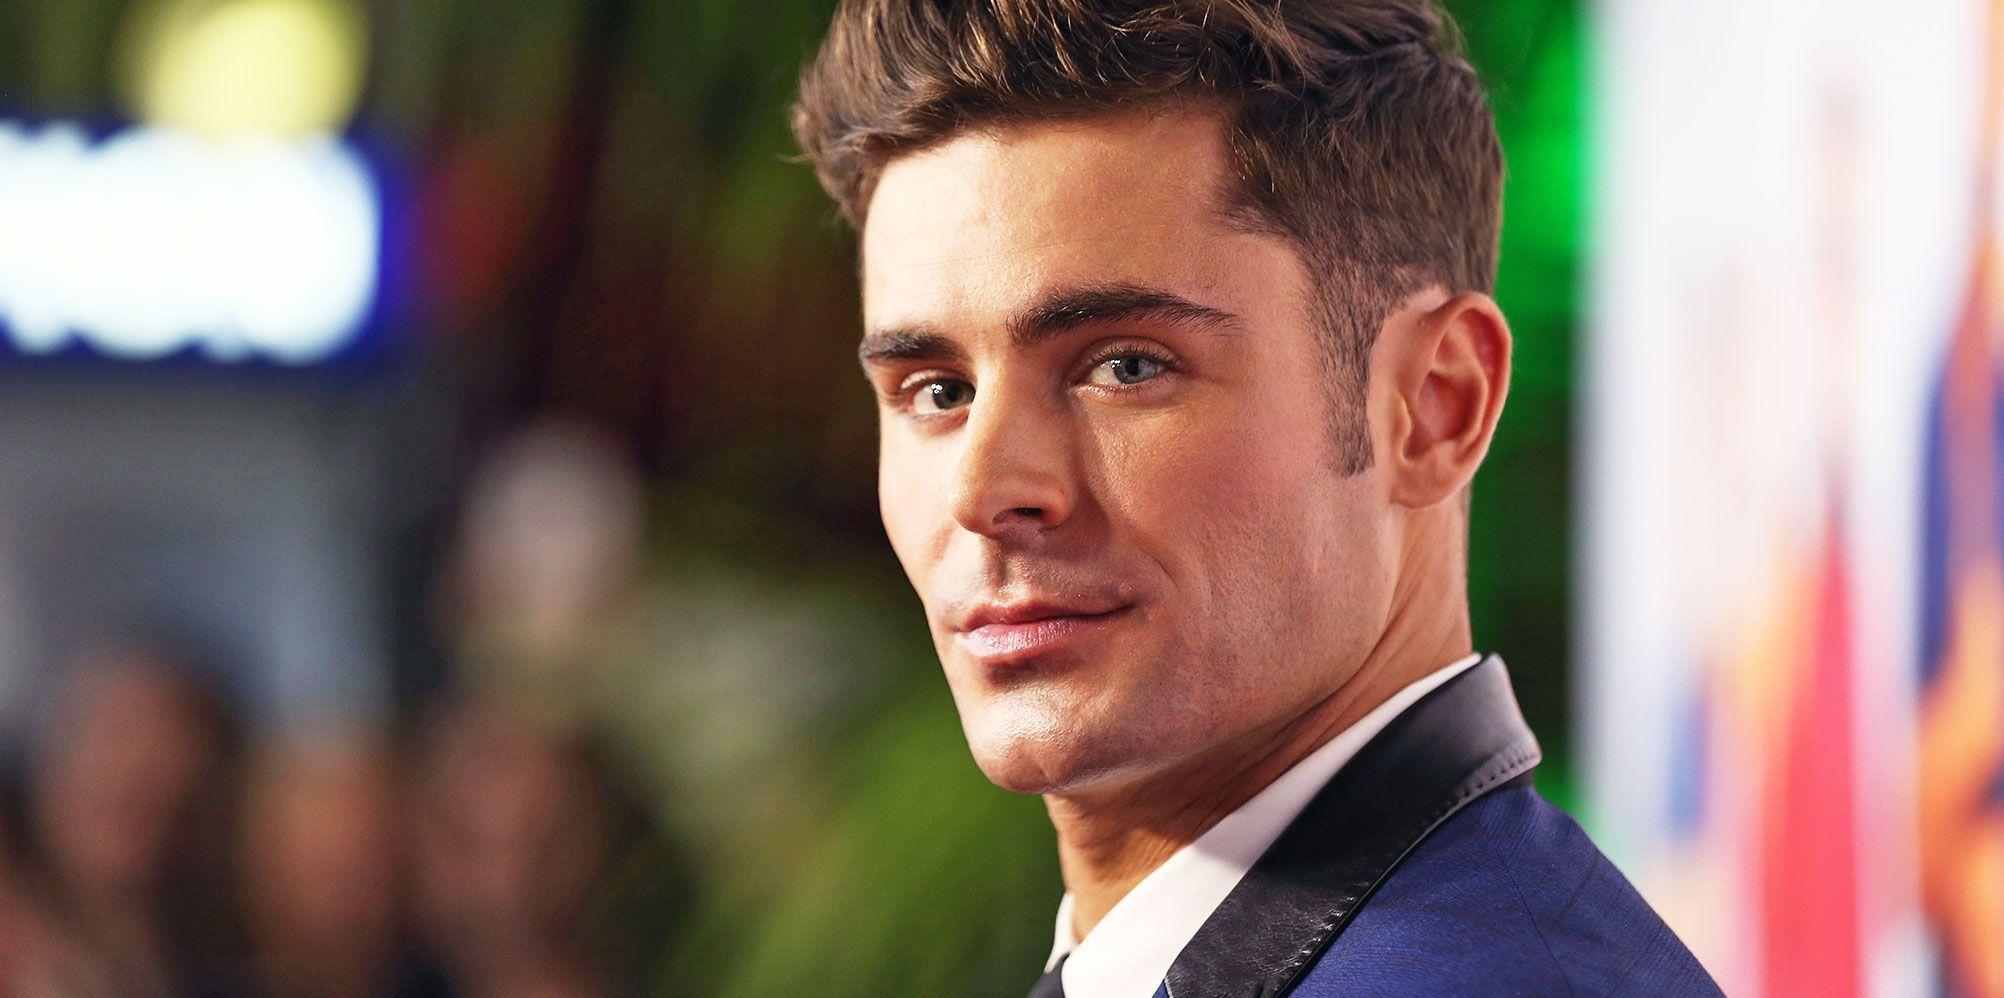 Zac Efron Dyed His Hair Platinum Blonde and Fans Can't Deal